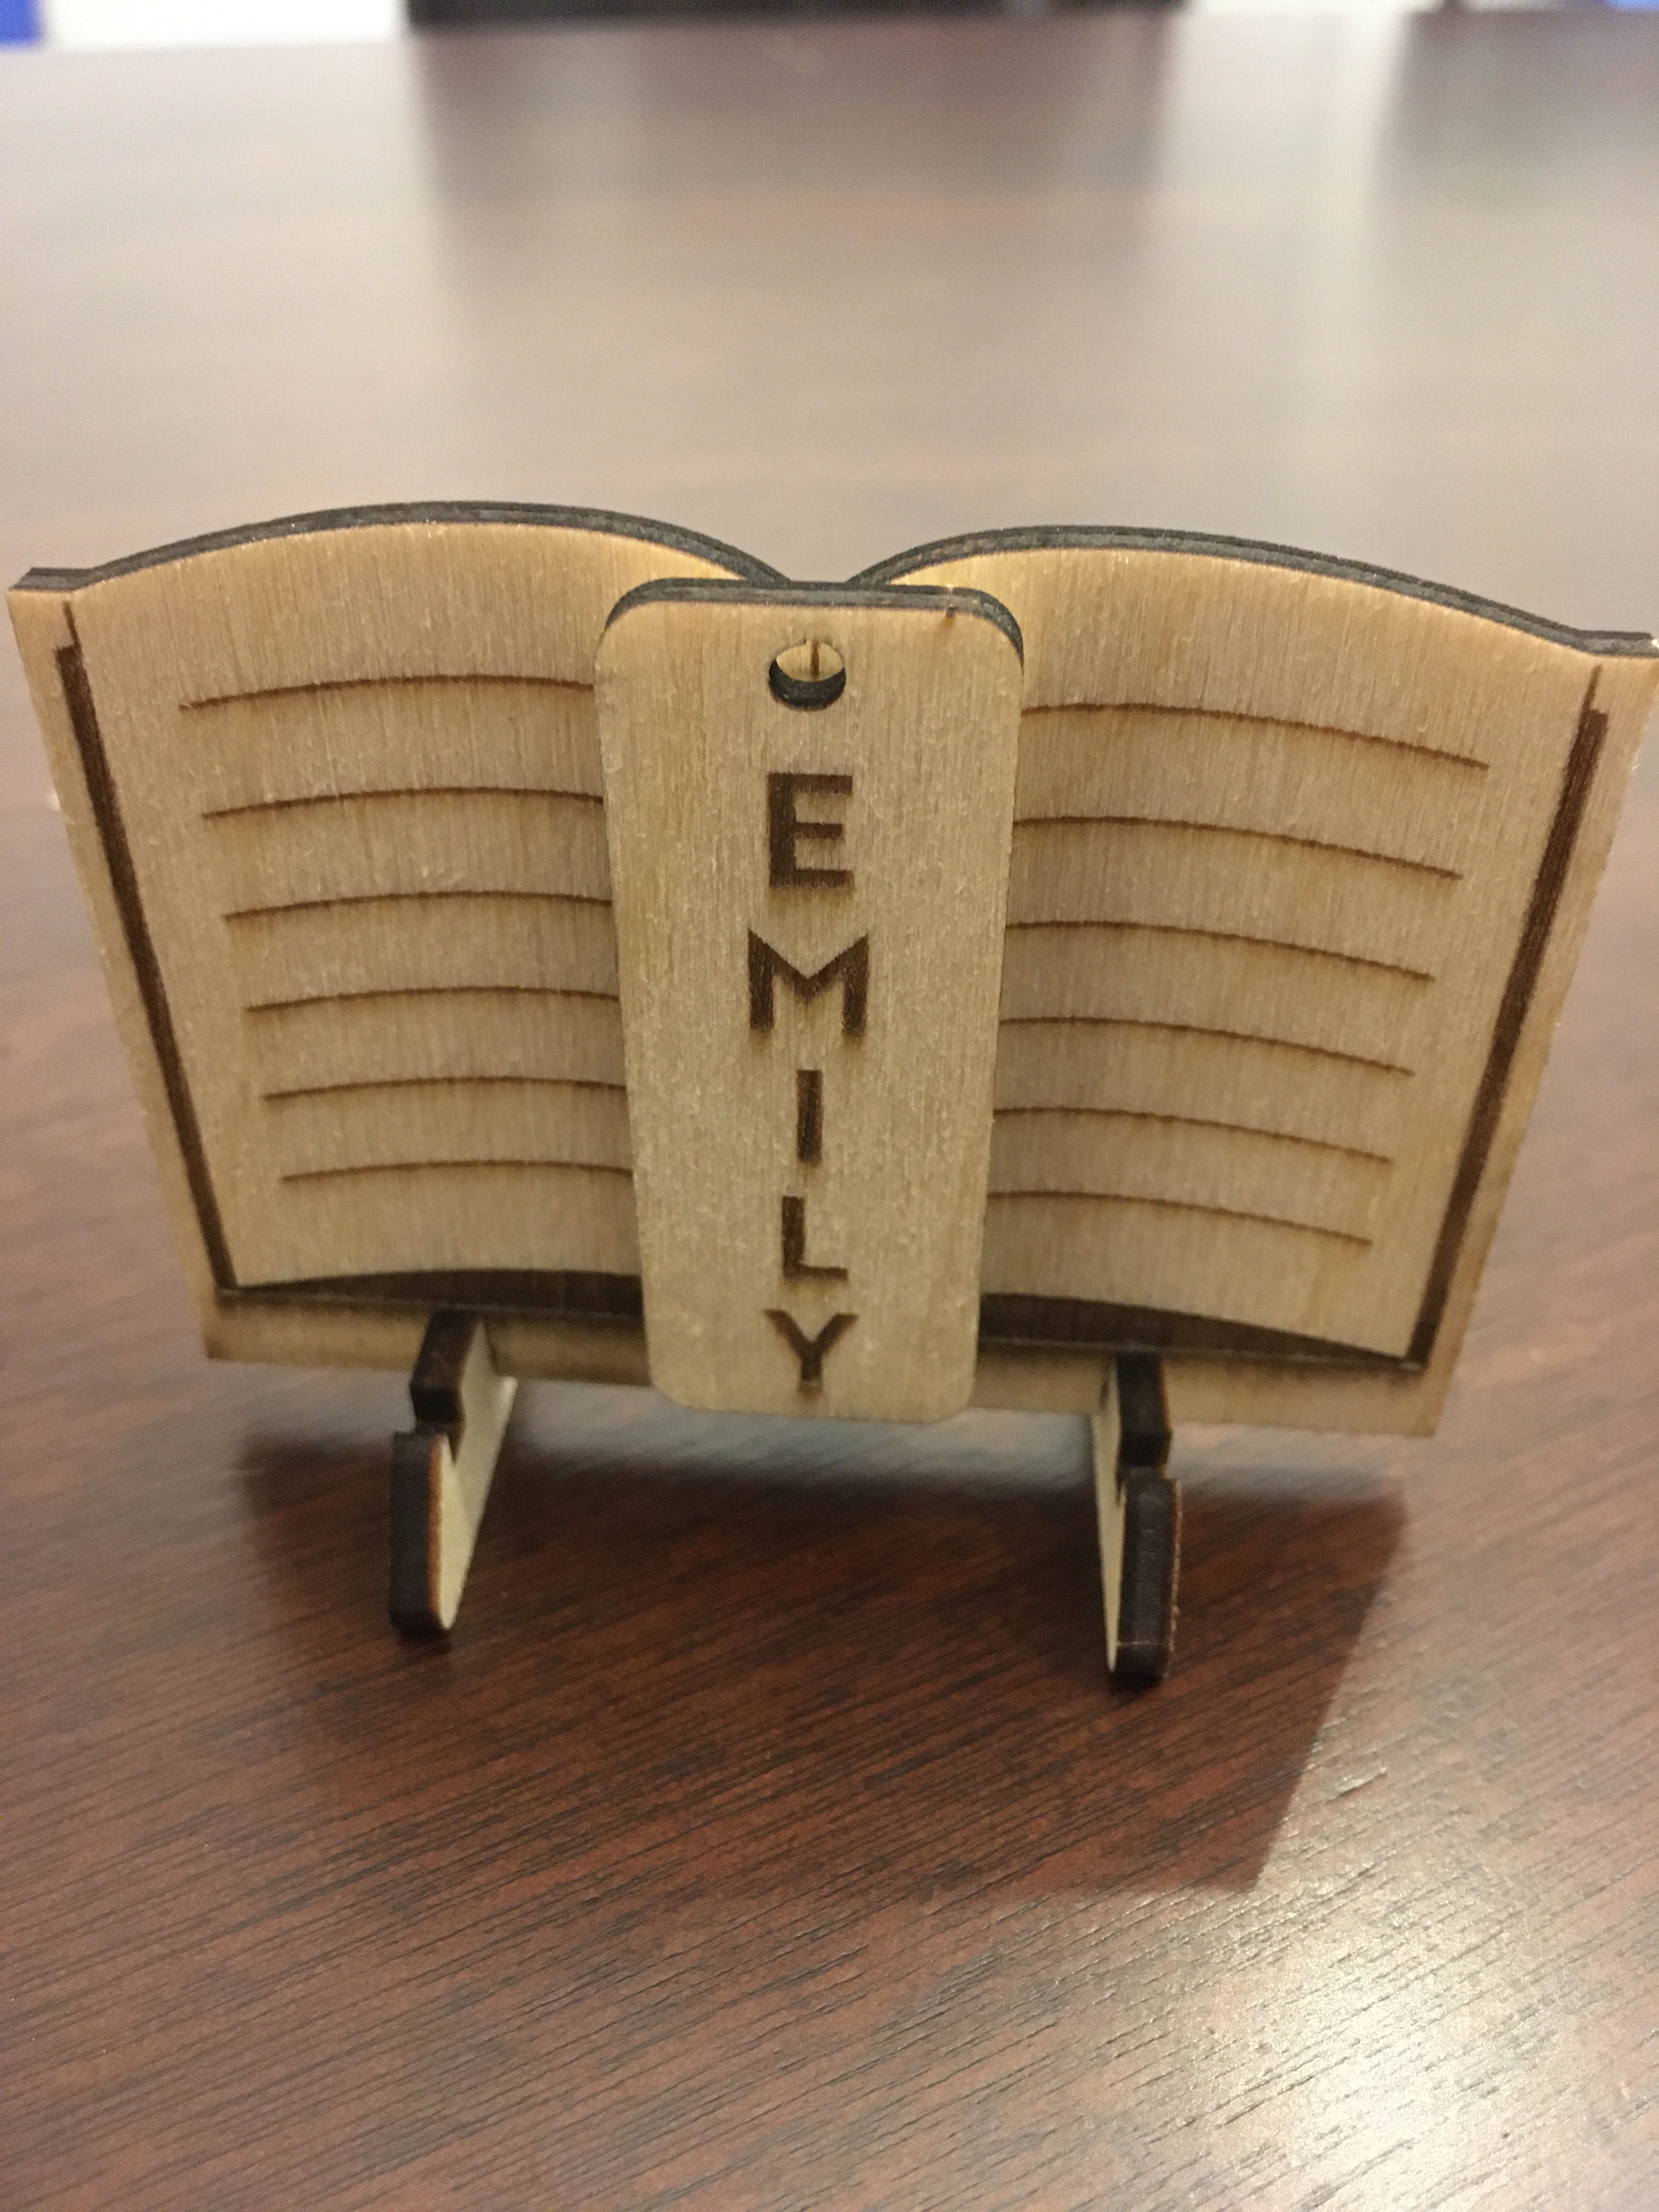 laser cut wood nametag and stand, nametag reads Emily, stand looks like an open book